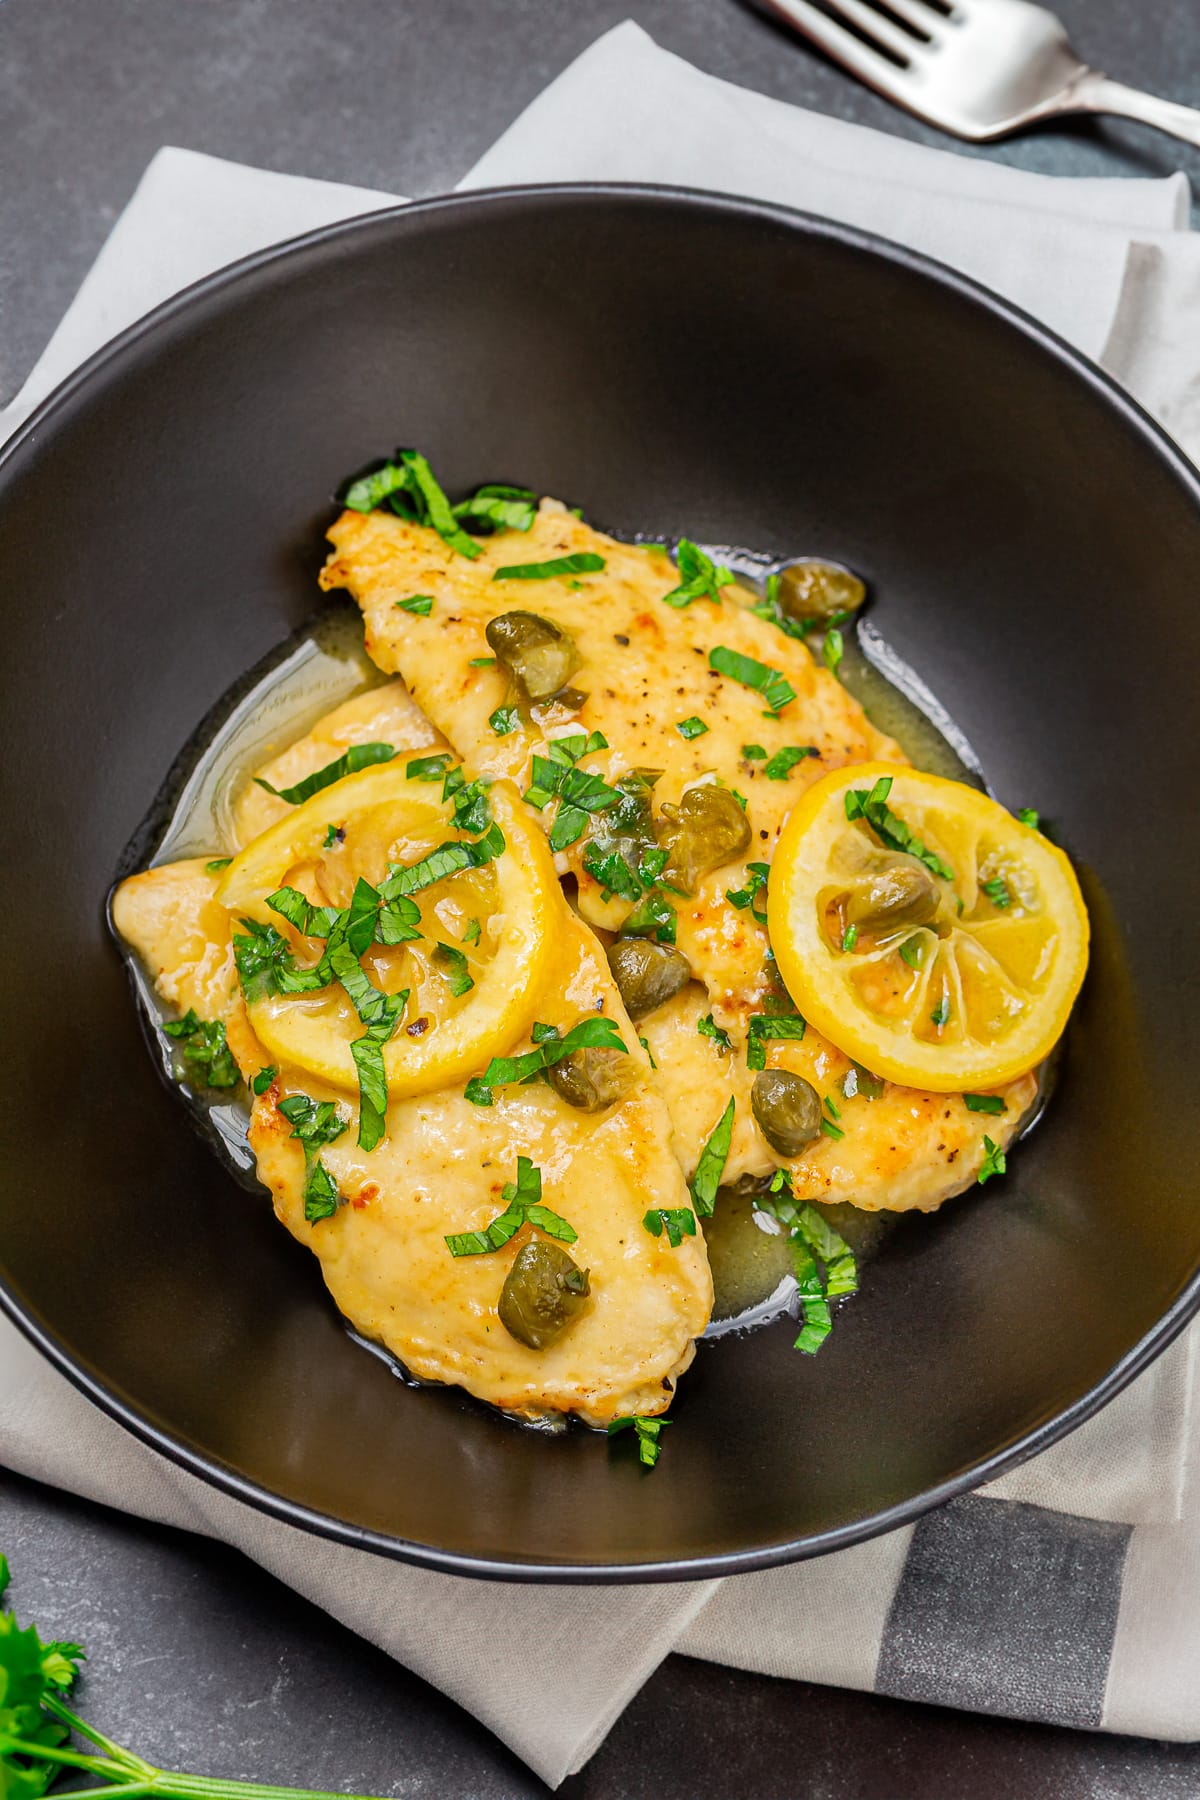 Plate of chicken piccata garnished with sliced lemon and capers on a dark table, capturing the vibrant colors and texture of the dish.